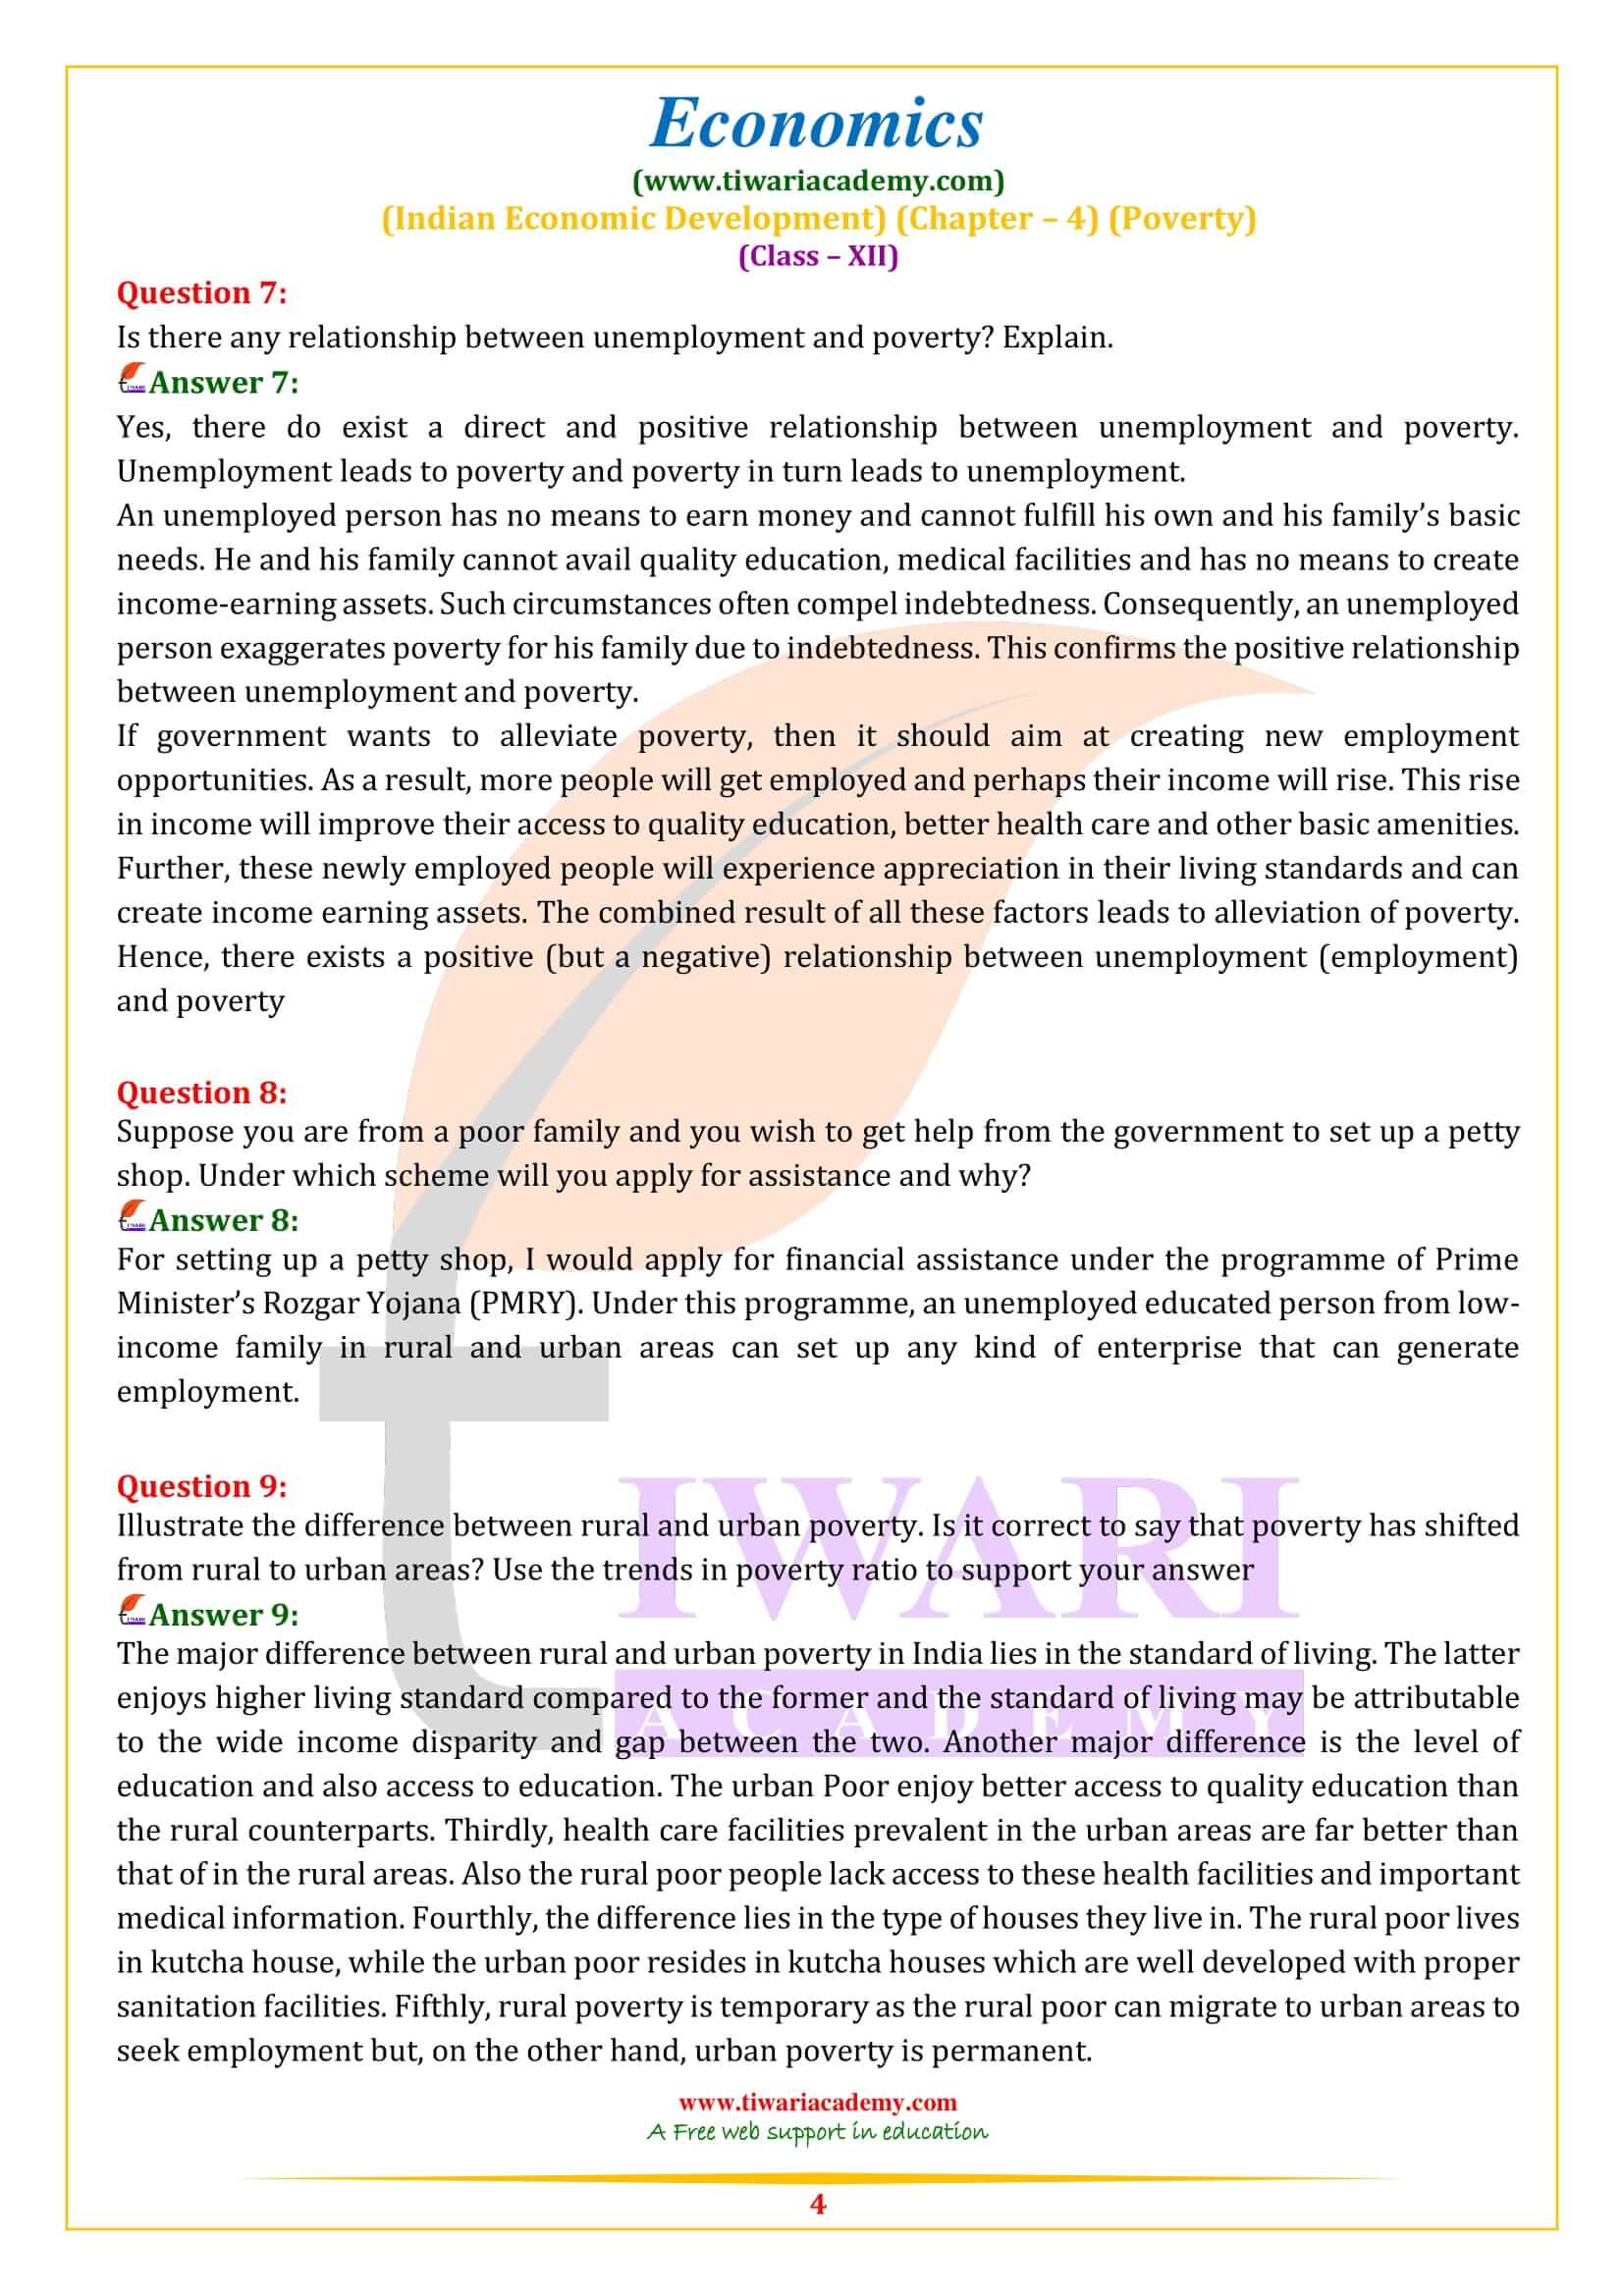 NCERT Solutions for Class 12 Indian Economic Development Chapter 4 free solutions